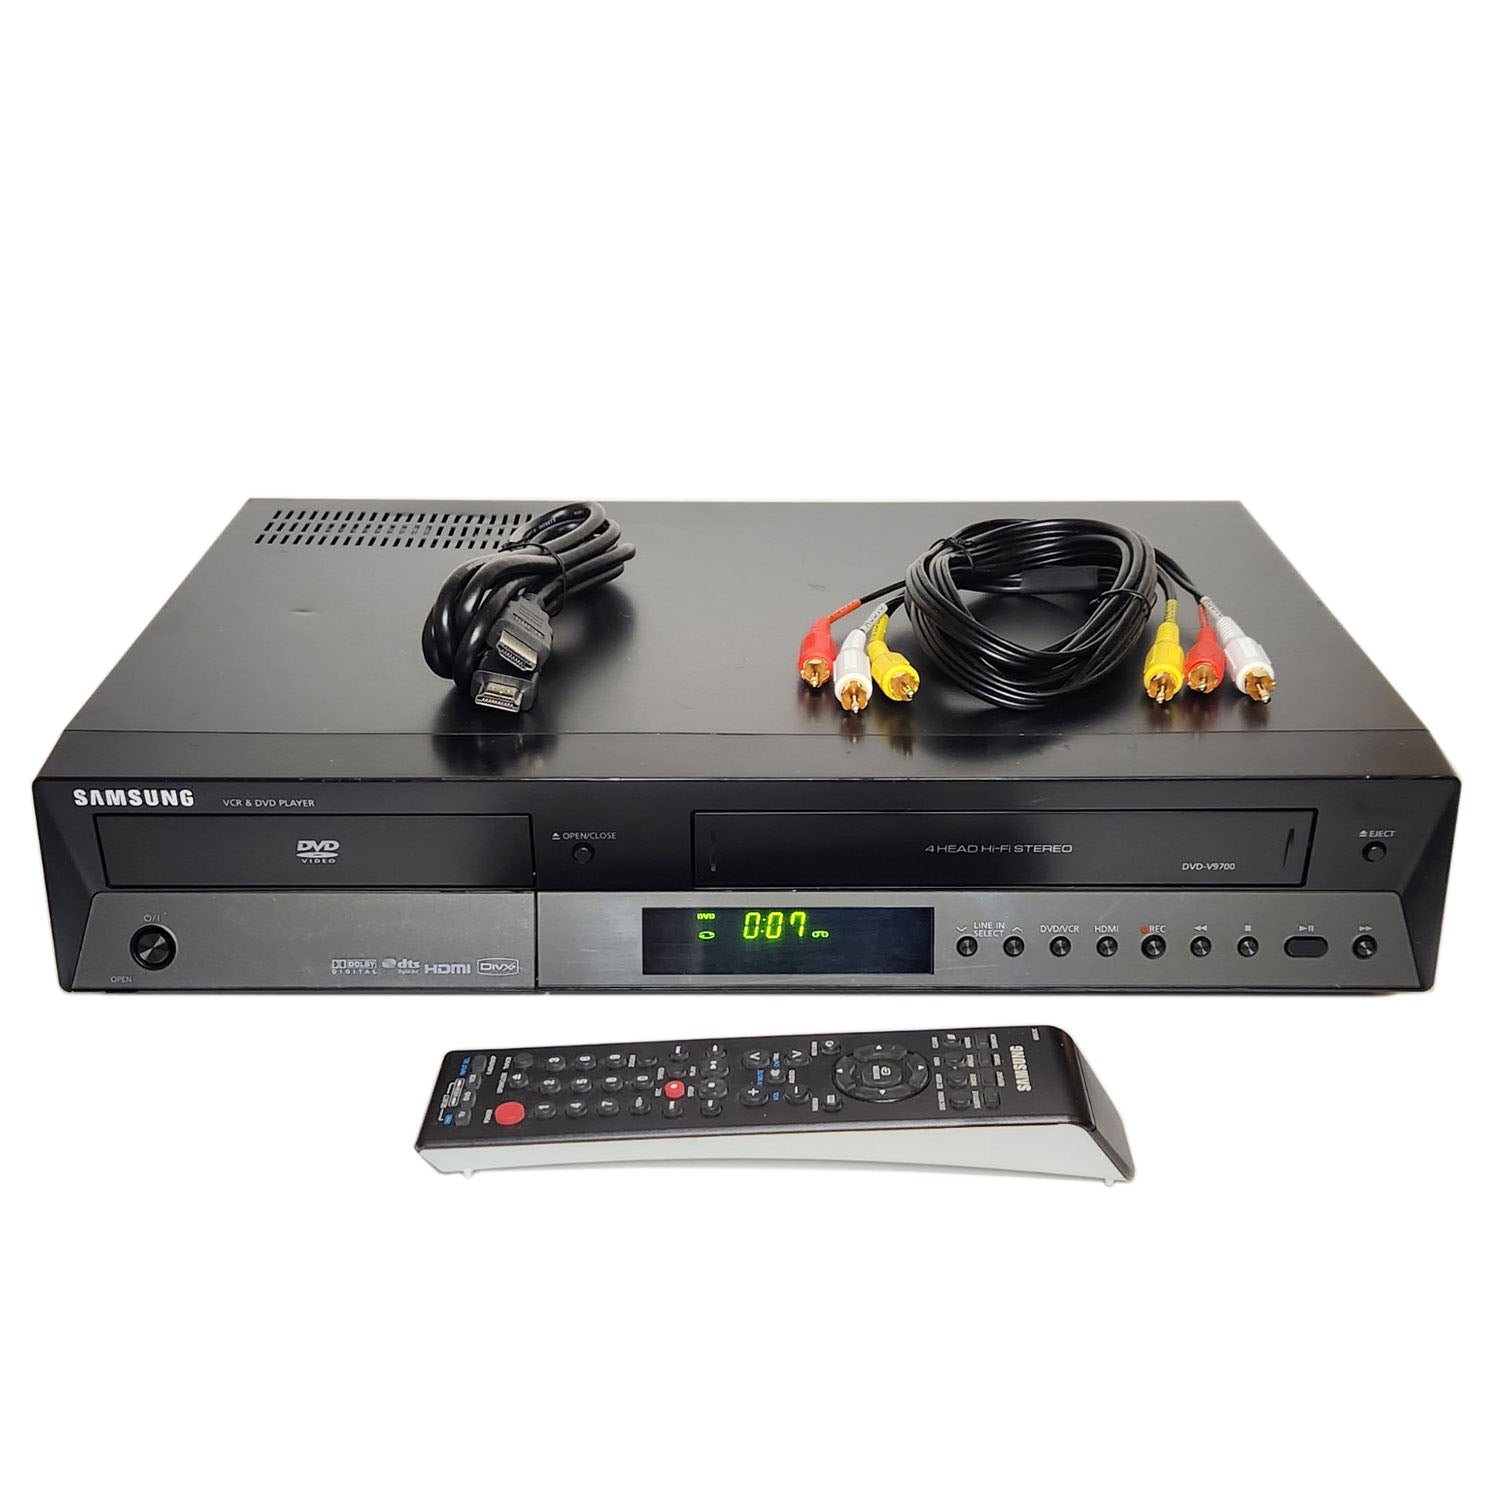 Samsung DVD-V9700 VCR/DVD Player Combo with HDMI